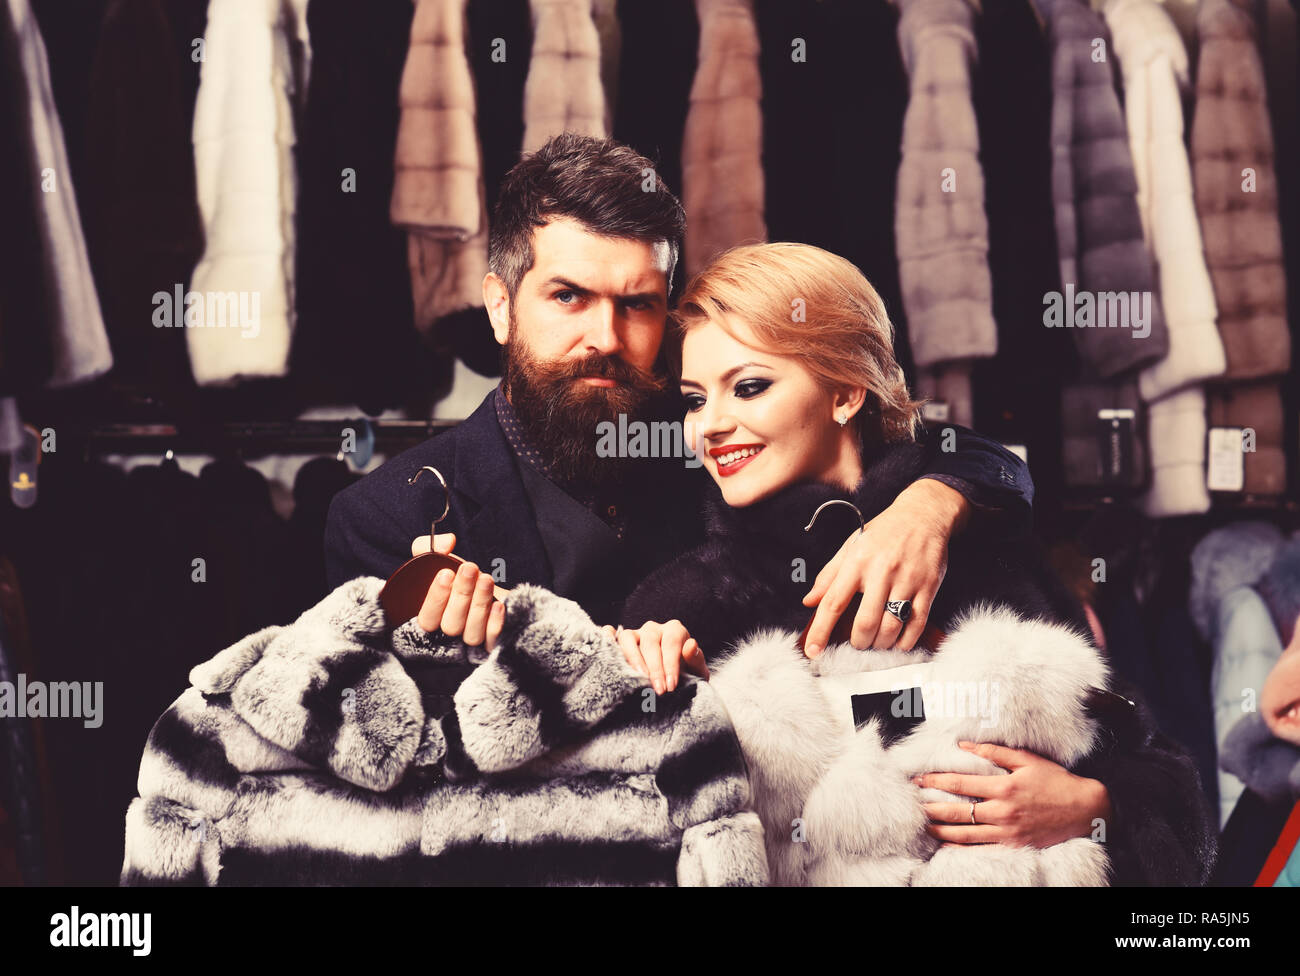 Woman with smiling face in black fur coat with bearded man. Luxury shopping concept. Couple in love holds white sable and chinchilla fur coats. Man with strict face and woman with coats in fur shop. Stock Photo